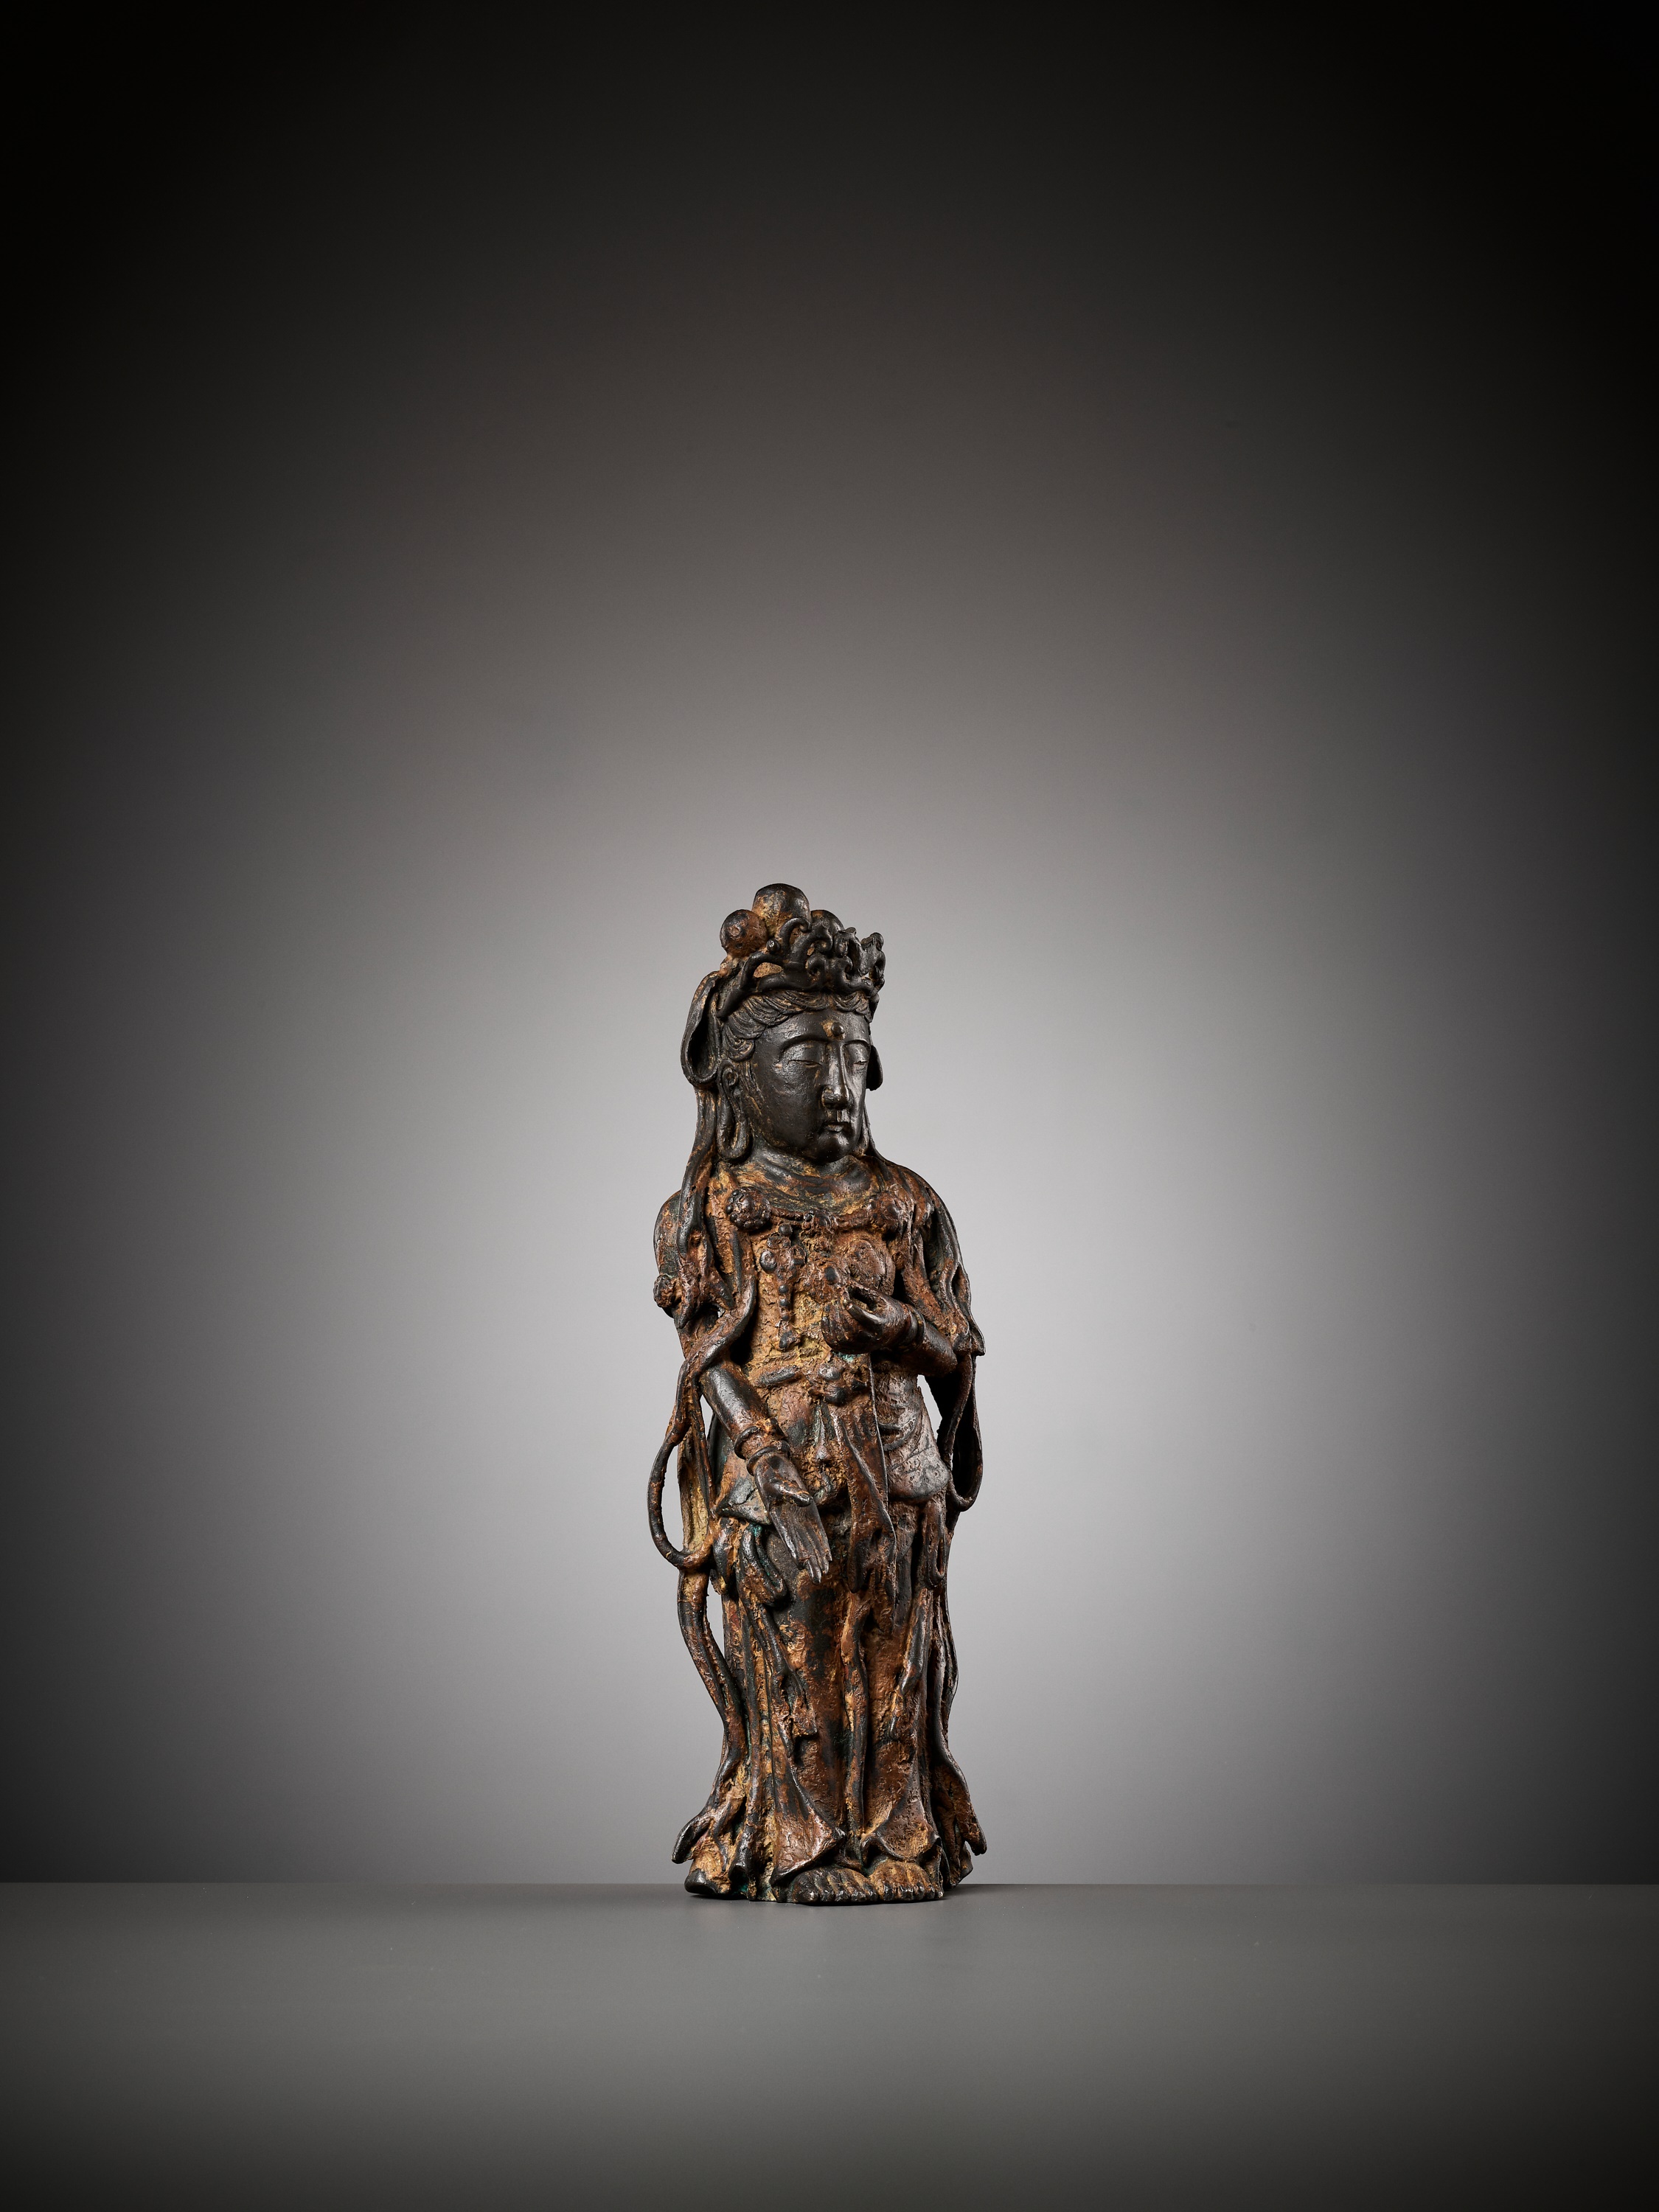 AN EXCEEDINGLY RARE BRONZE FIGURE OF GUANYIN, DALI KINGDOM, 12TH - MID-13TH CENTURY - Image 19 of 20